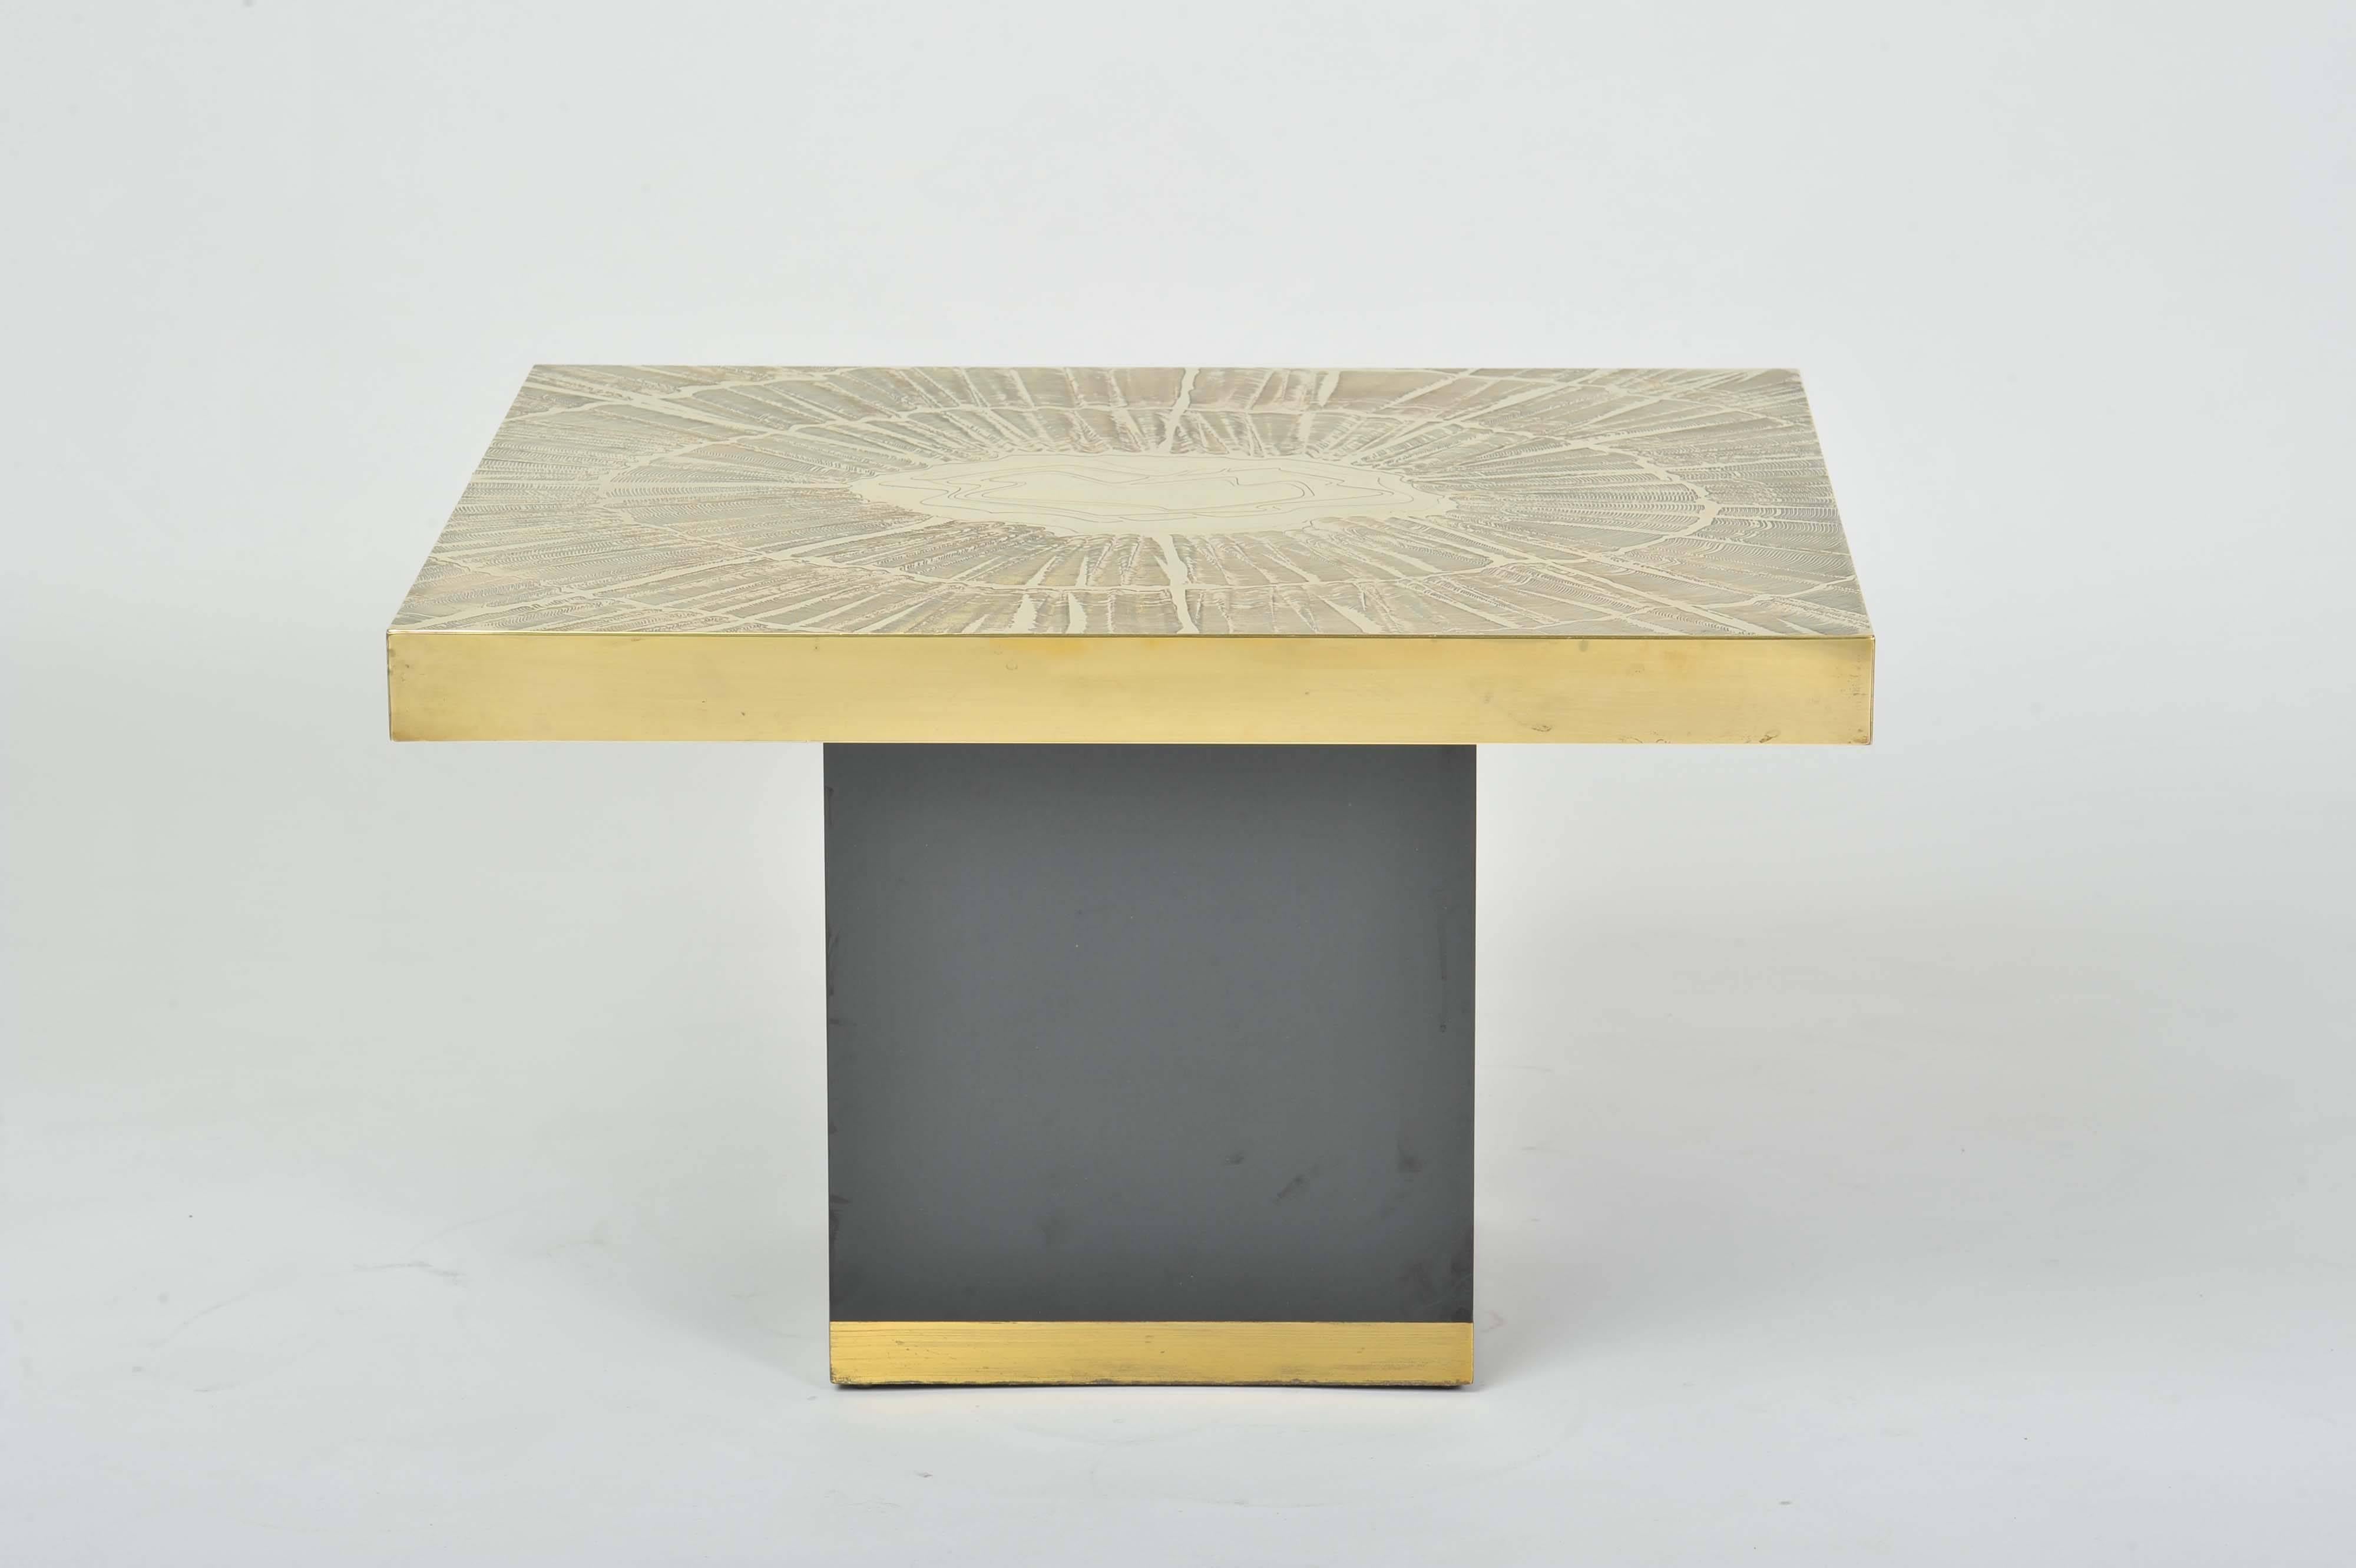 1970's Artistic brass coffee table with unique etched abstract sun ray design top. The base is black laminate on wood edged with a brass border.
Belgium origin in the style of Albert Verneuil, unsigned.
